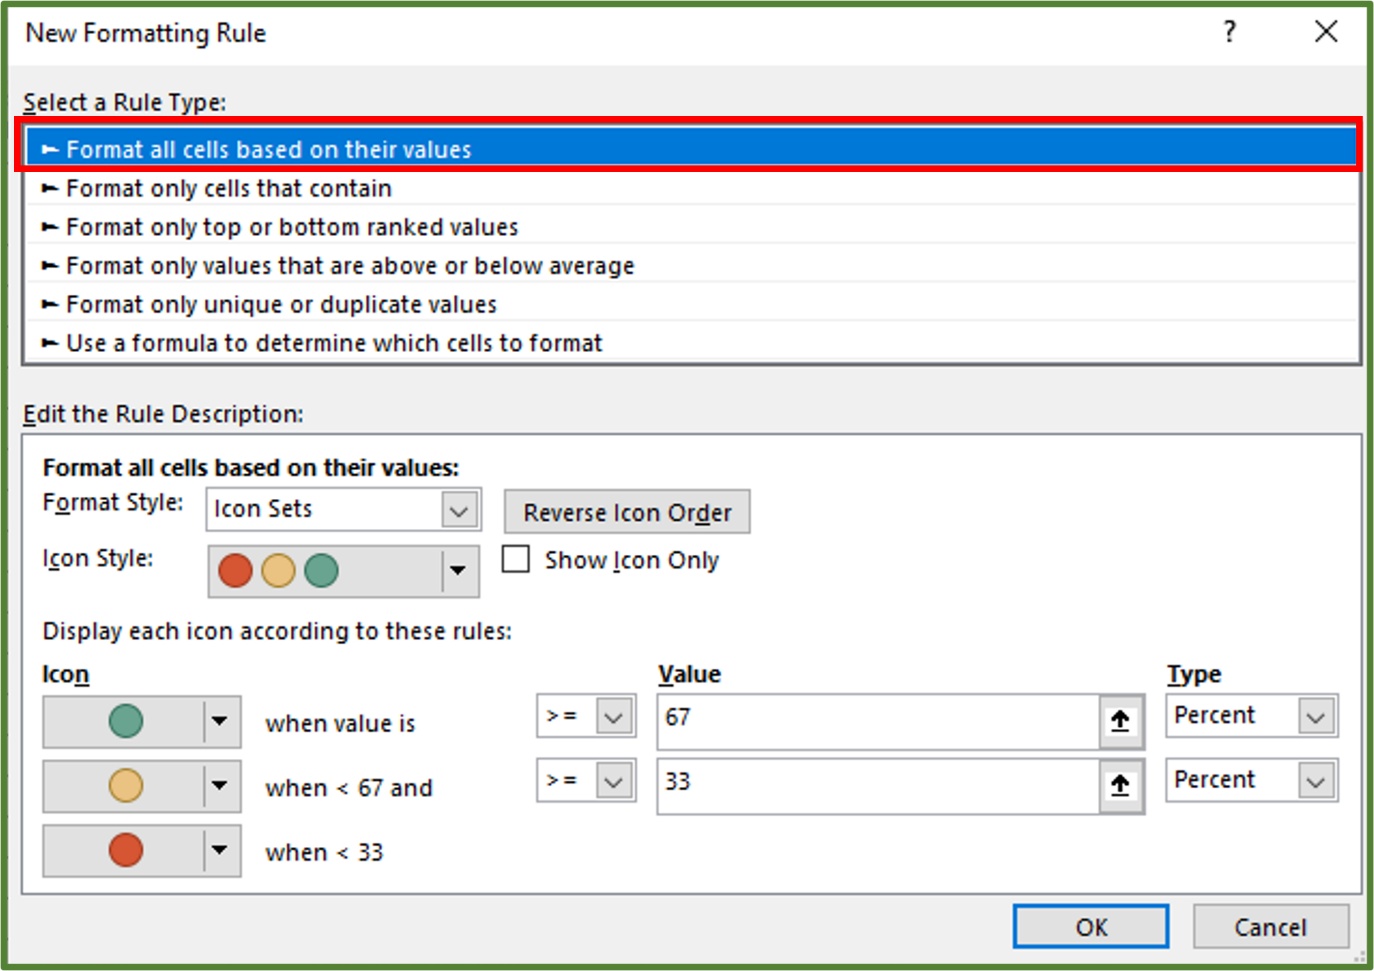 Screenshot showing the Format all cells based on their values option highlighted.